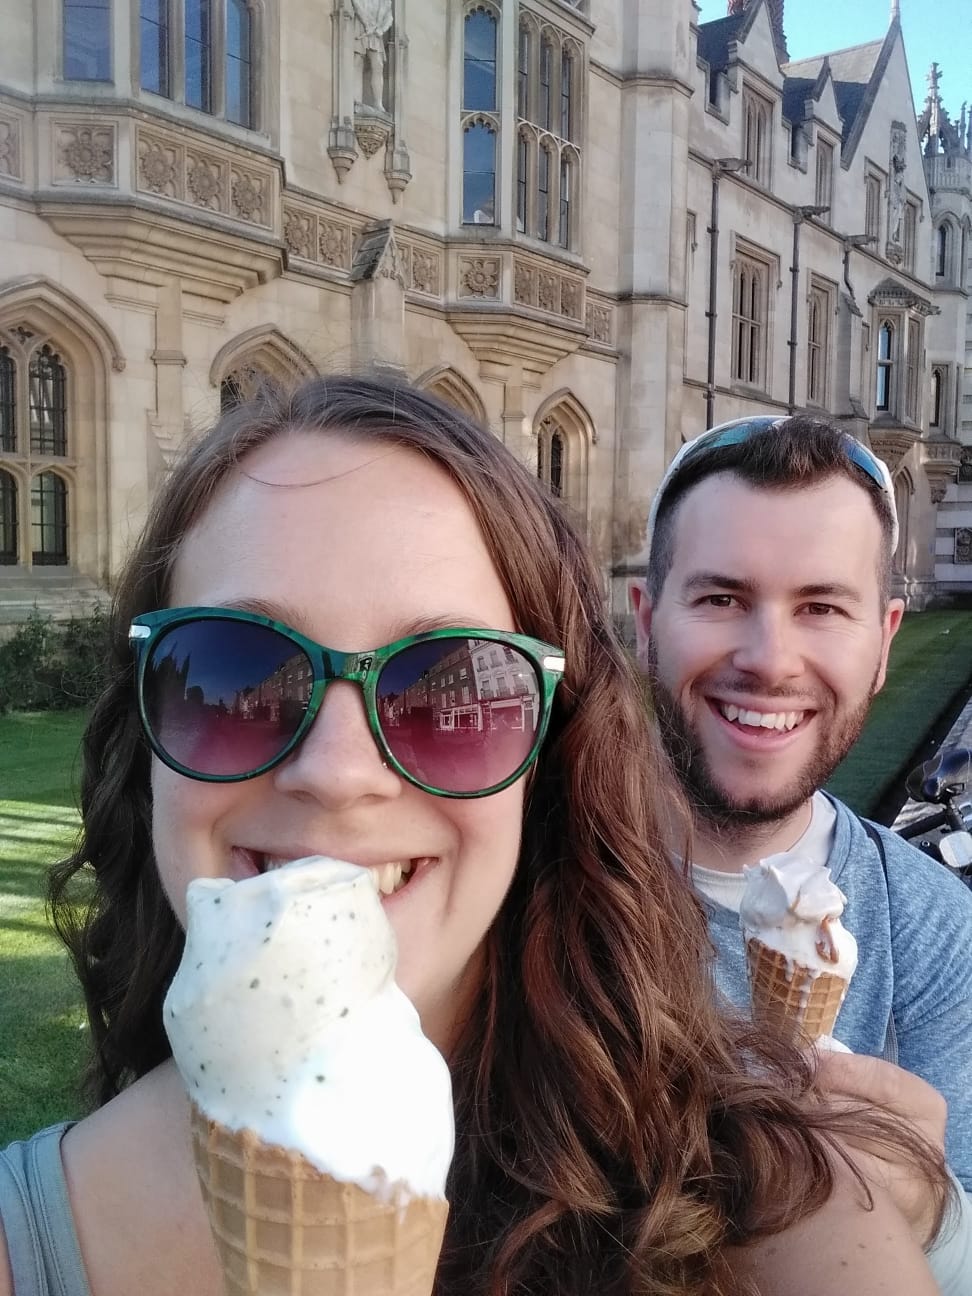 ARU PhD student Jack pictured with a friend eating an ice cream from Jacks Gelato.